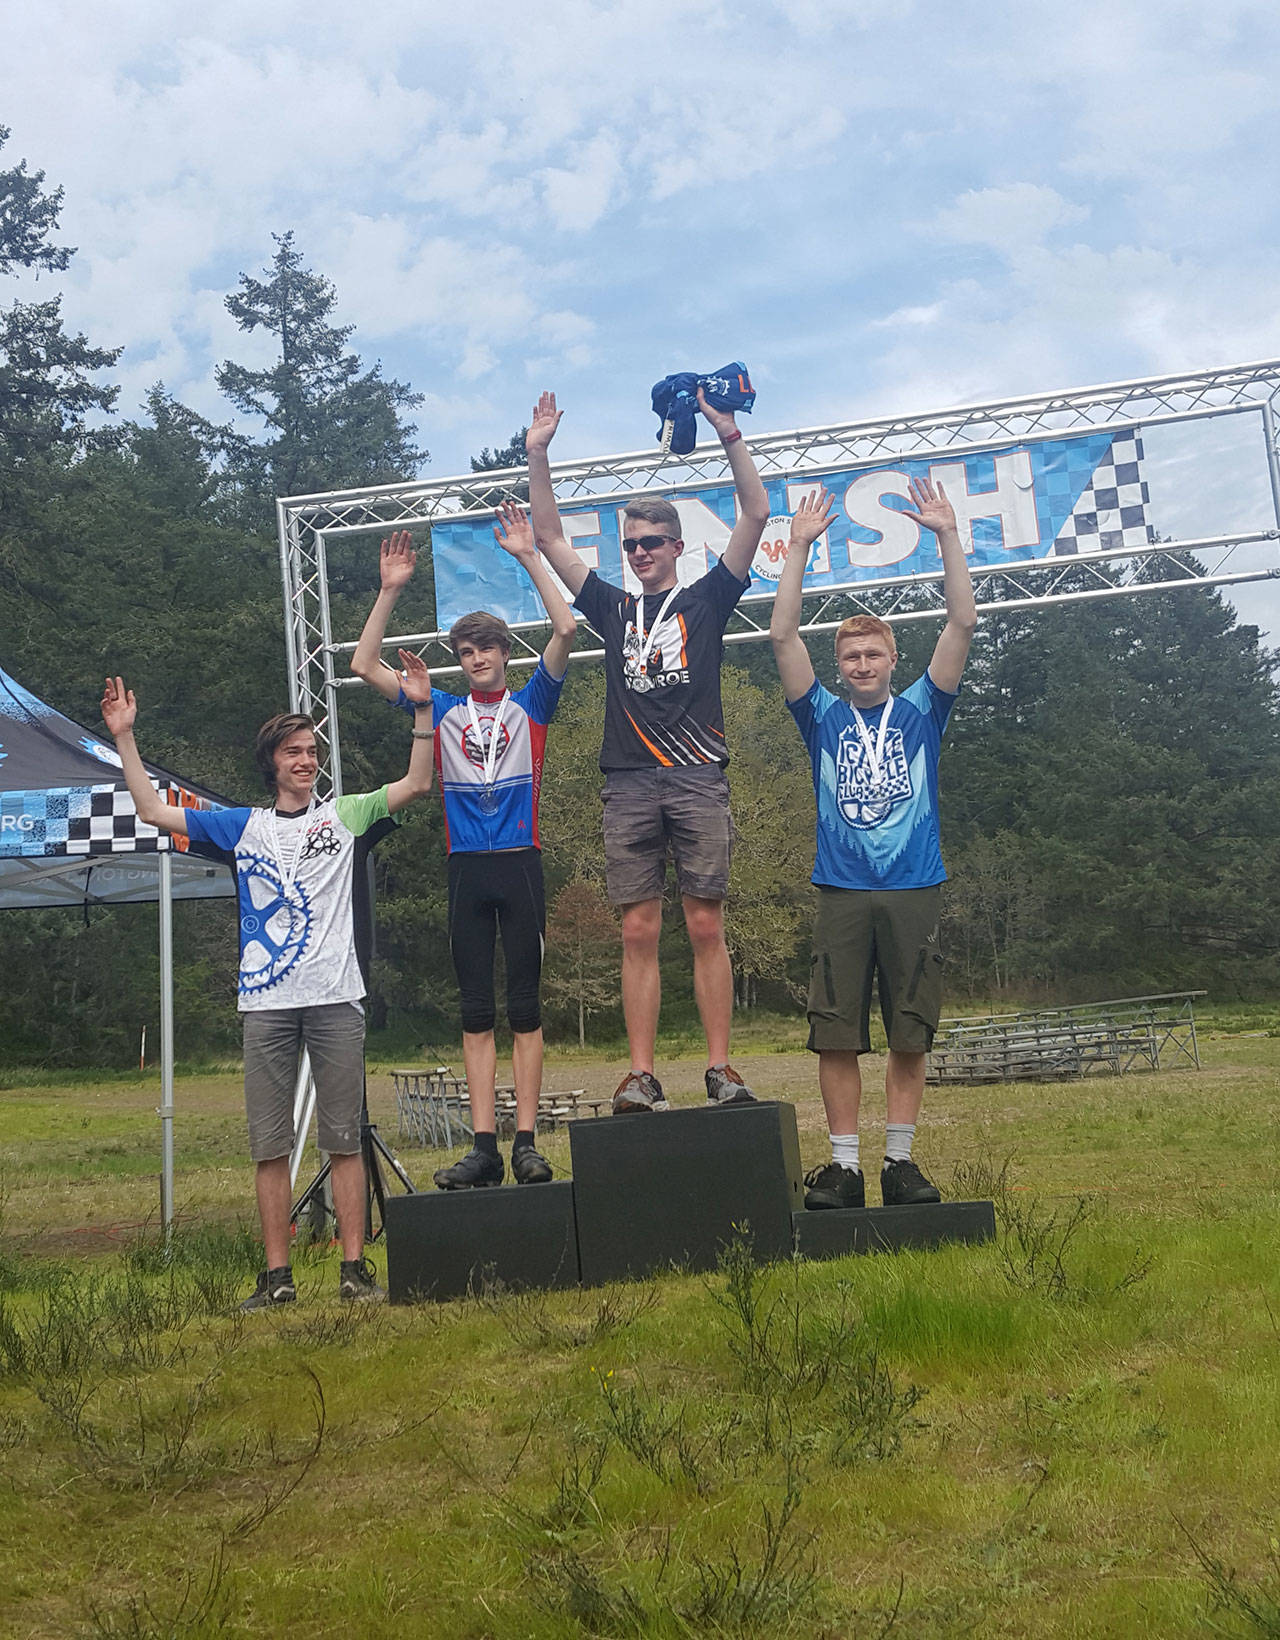 High school team rider Ezra Twieten (far left) of the Gear Grinders joins the other medalists on the winners’ platform.